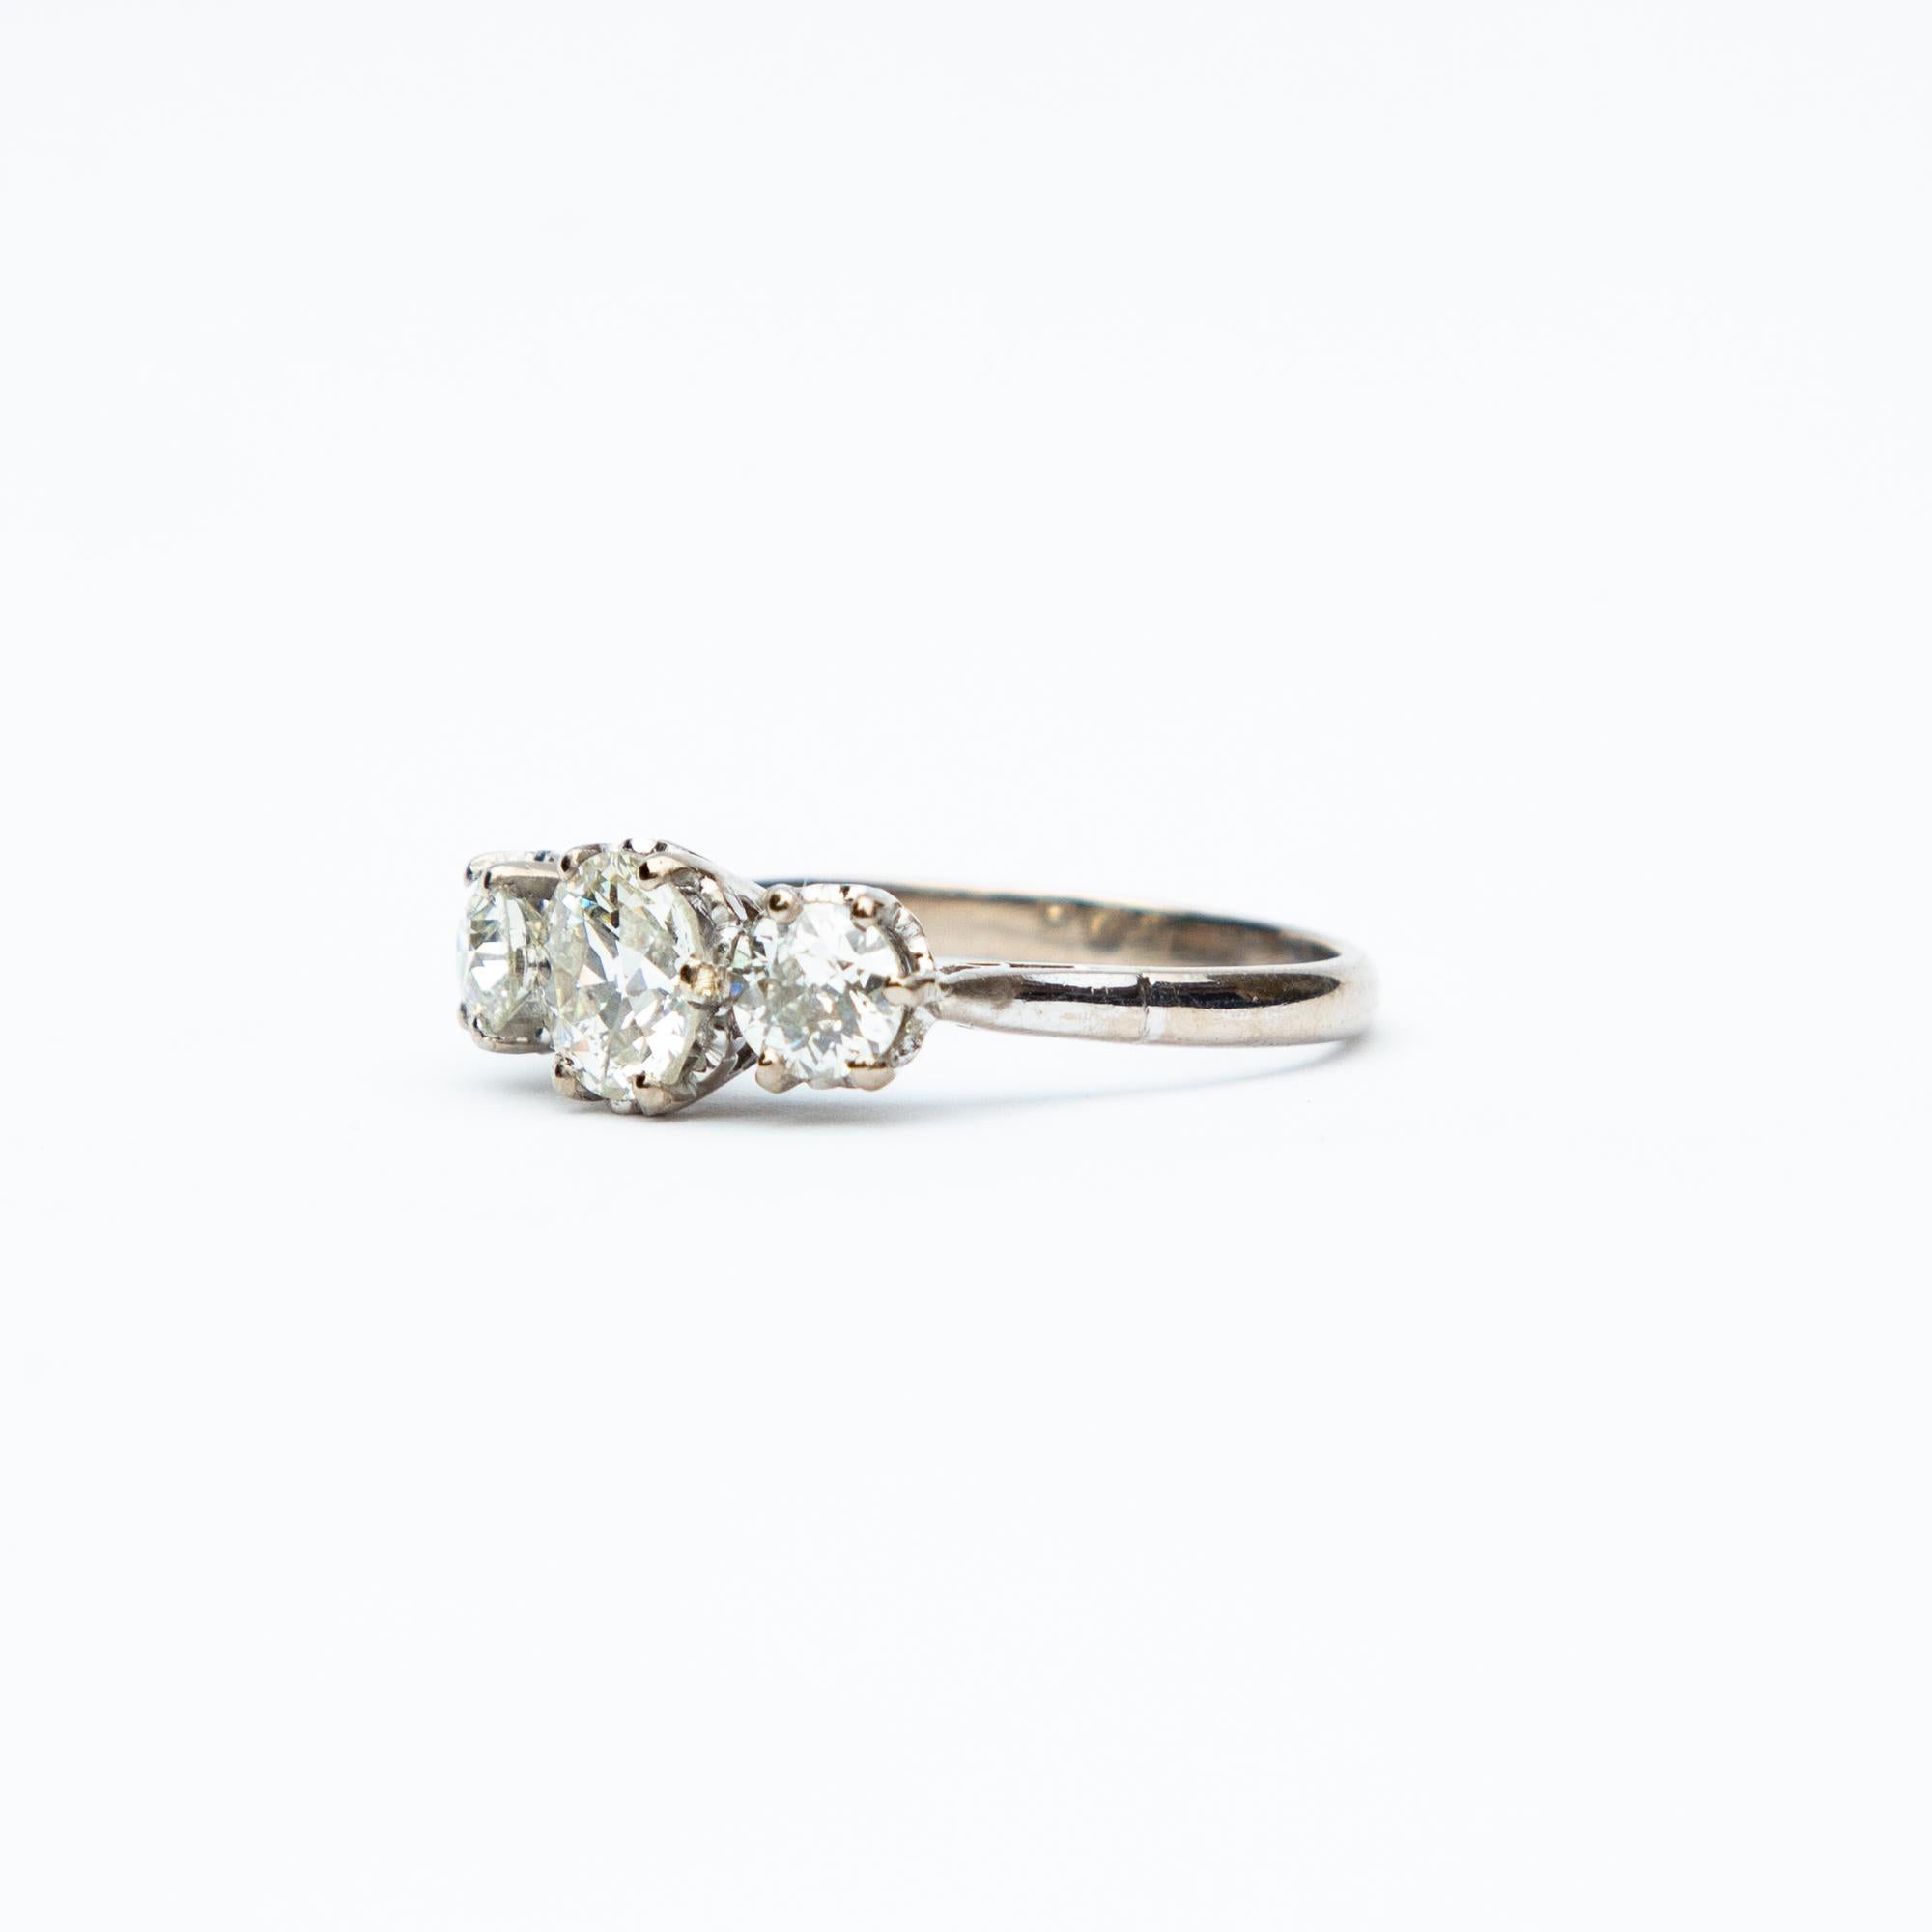 A simply stunning Art Deco Diamond three stone ring. Each a these beautiful diamonds is old European cut with the central stone being the largest. This lovely piece is eighteen carat white gold set, each diamond secured by six claws. Total diamond